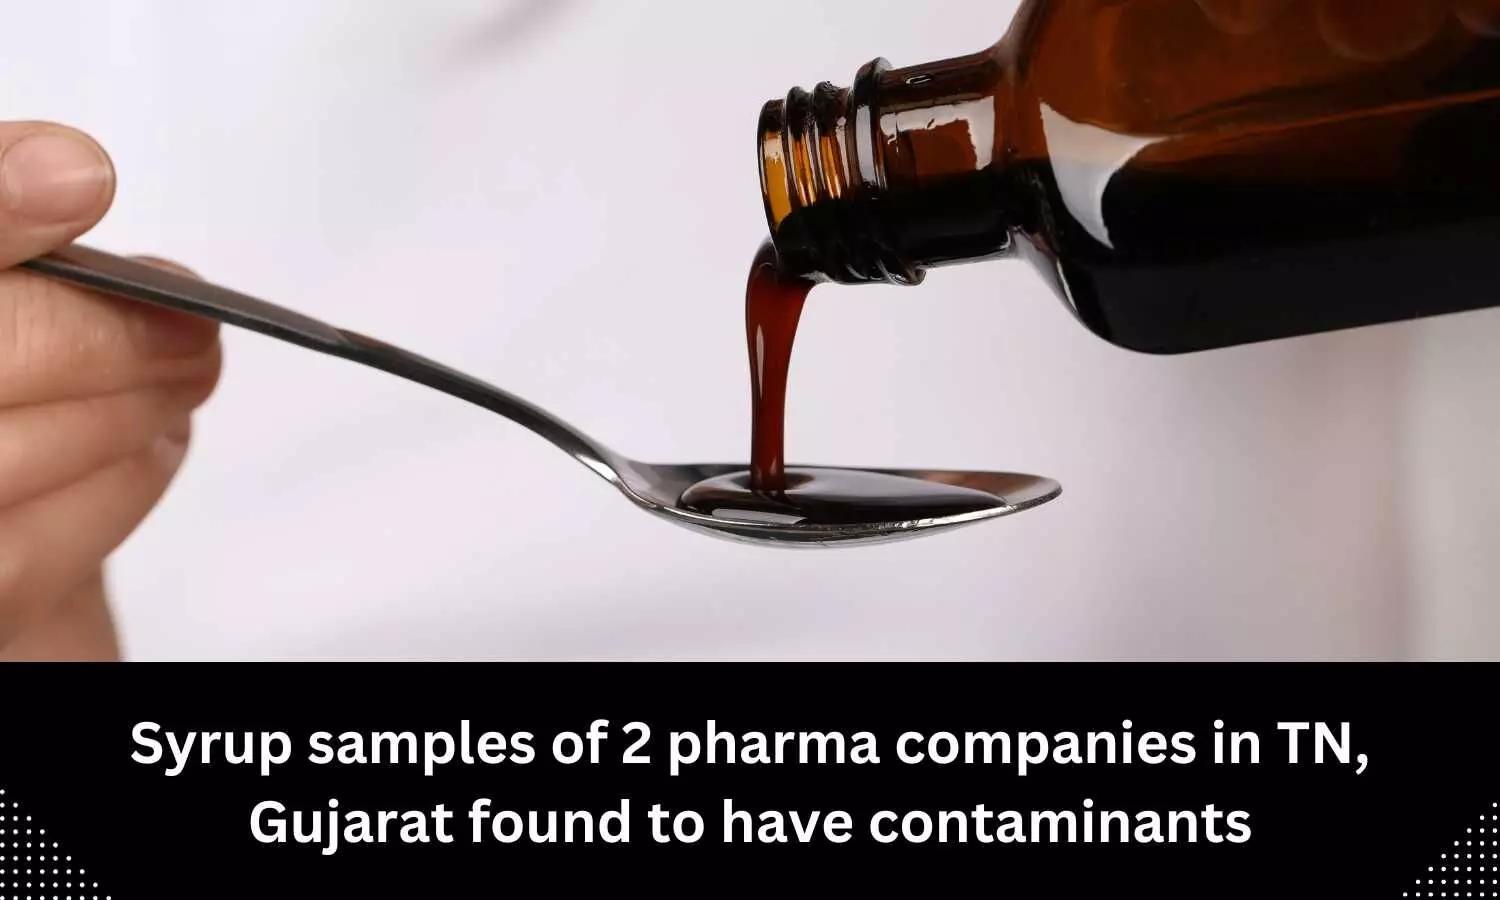 Syrup samples of 2 Indian pharma cos found to have contaminants